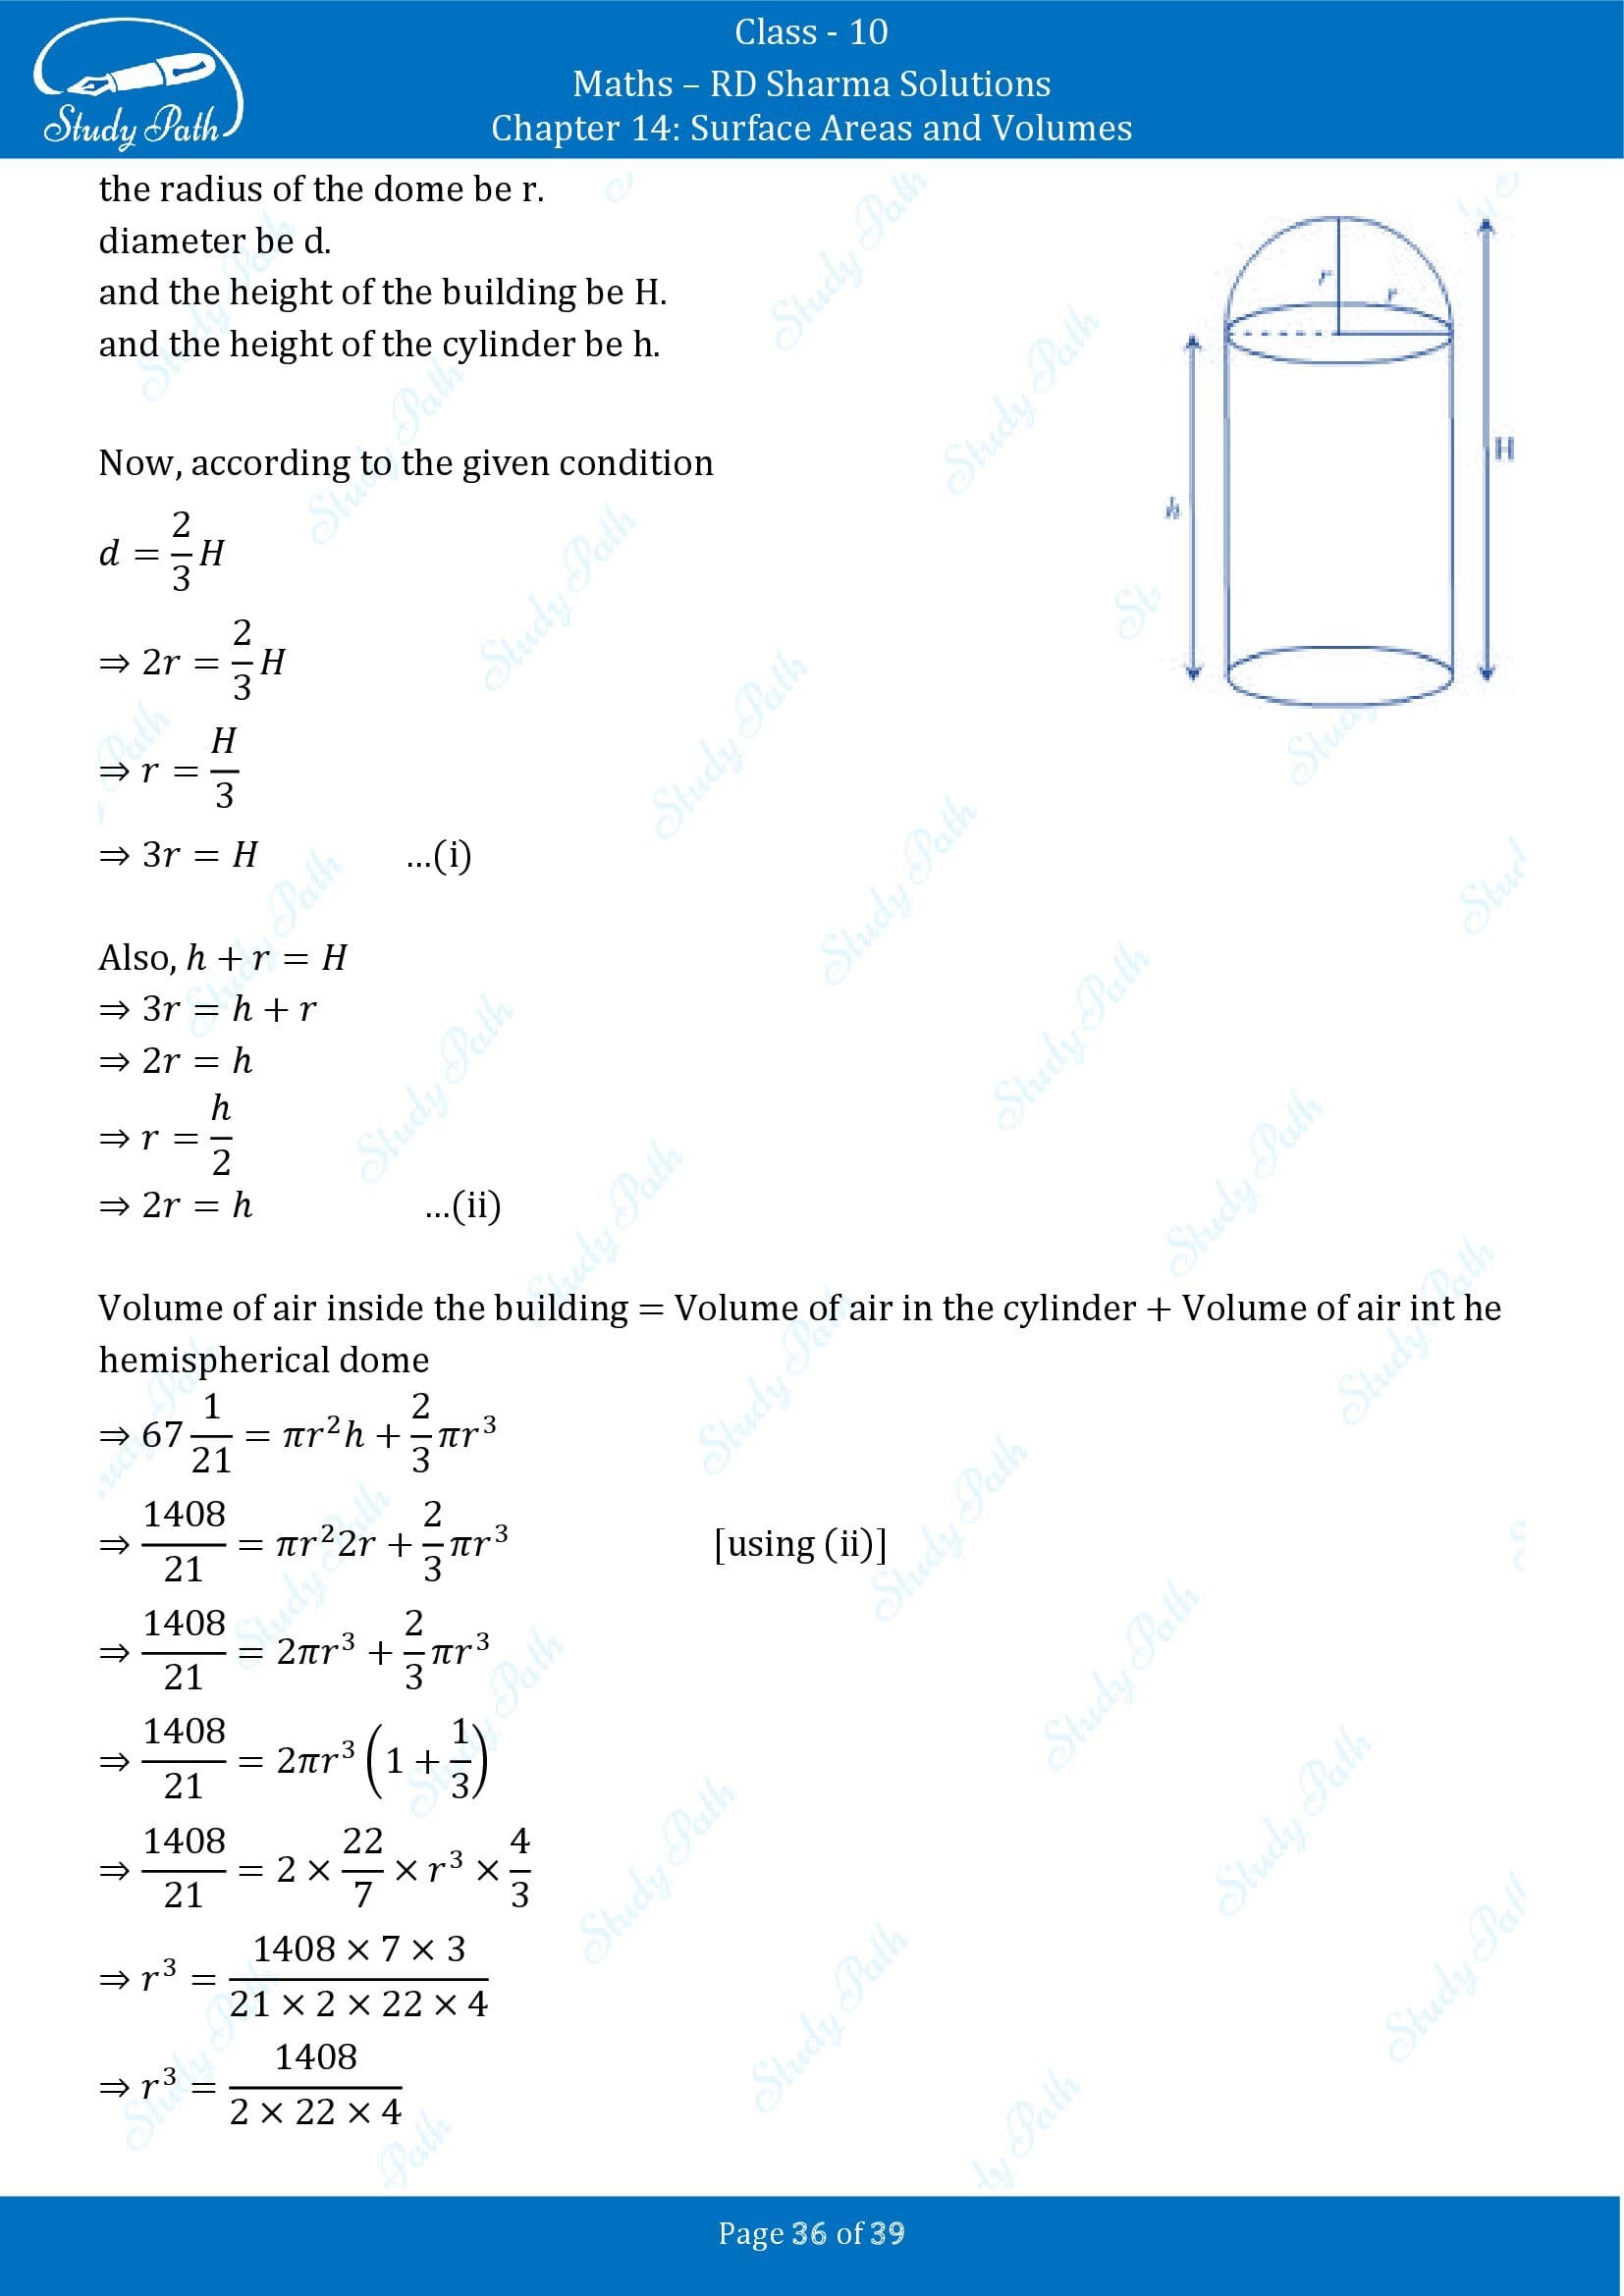 RD Sharma Solutions Class 10 Chapter 14 Surface Areas and Volumes Exercise 14.2 00036